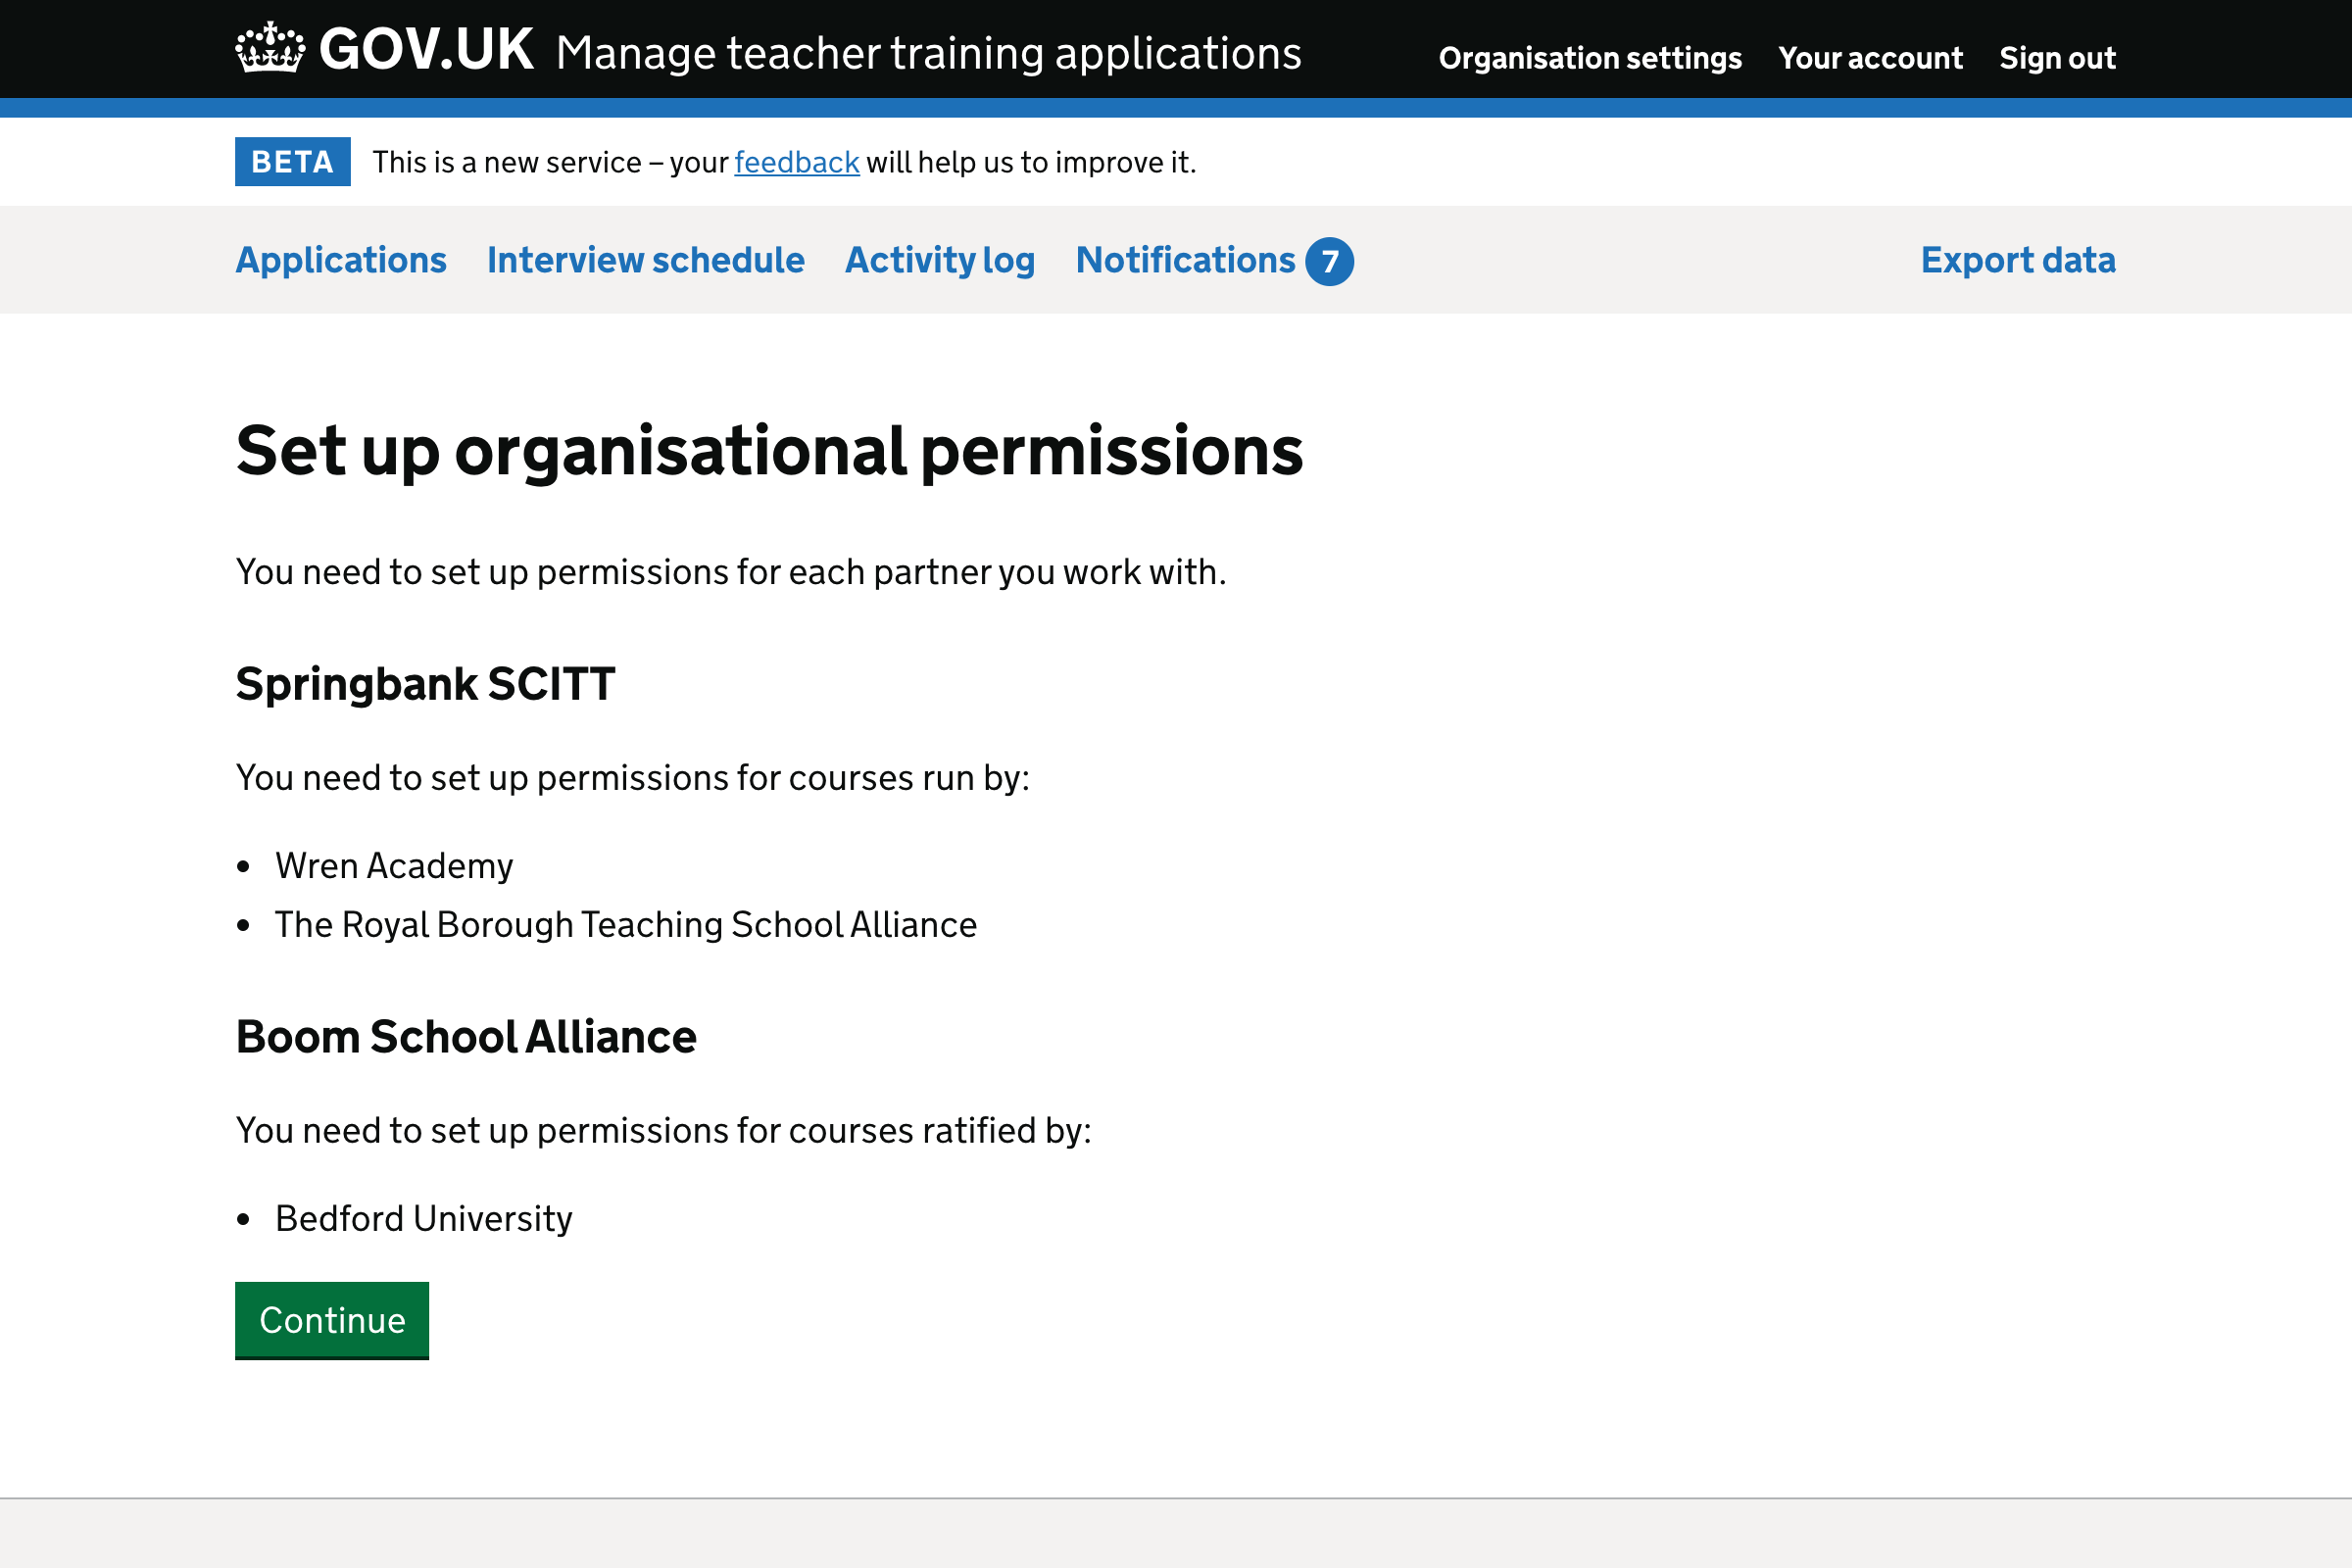 Screenshot of ‘Set up organisational permissions’ page.